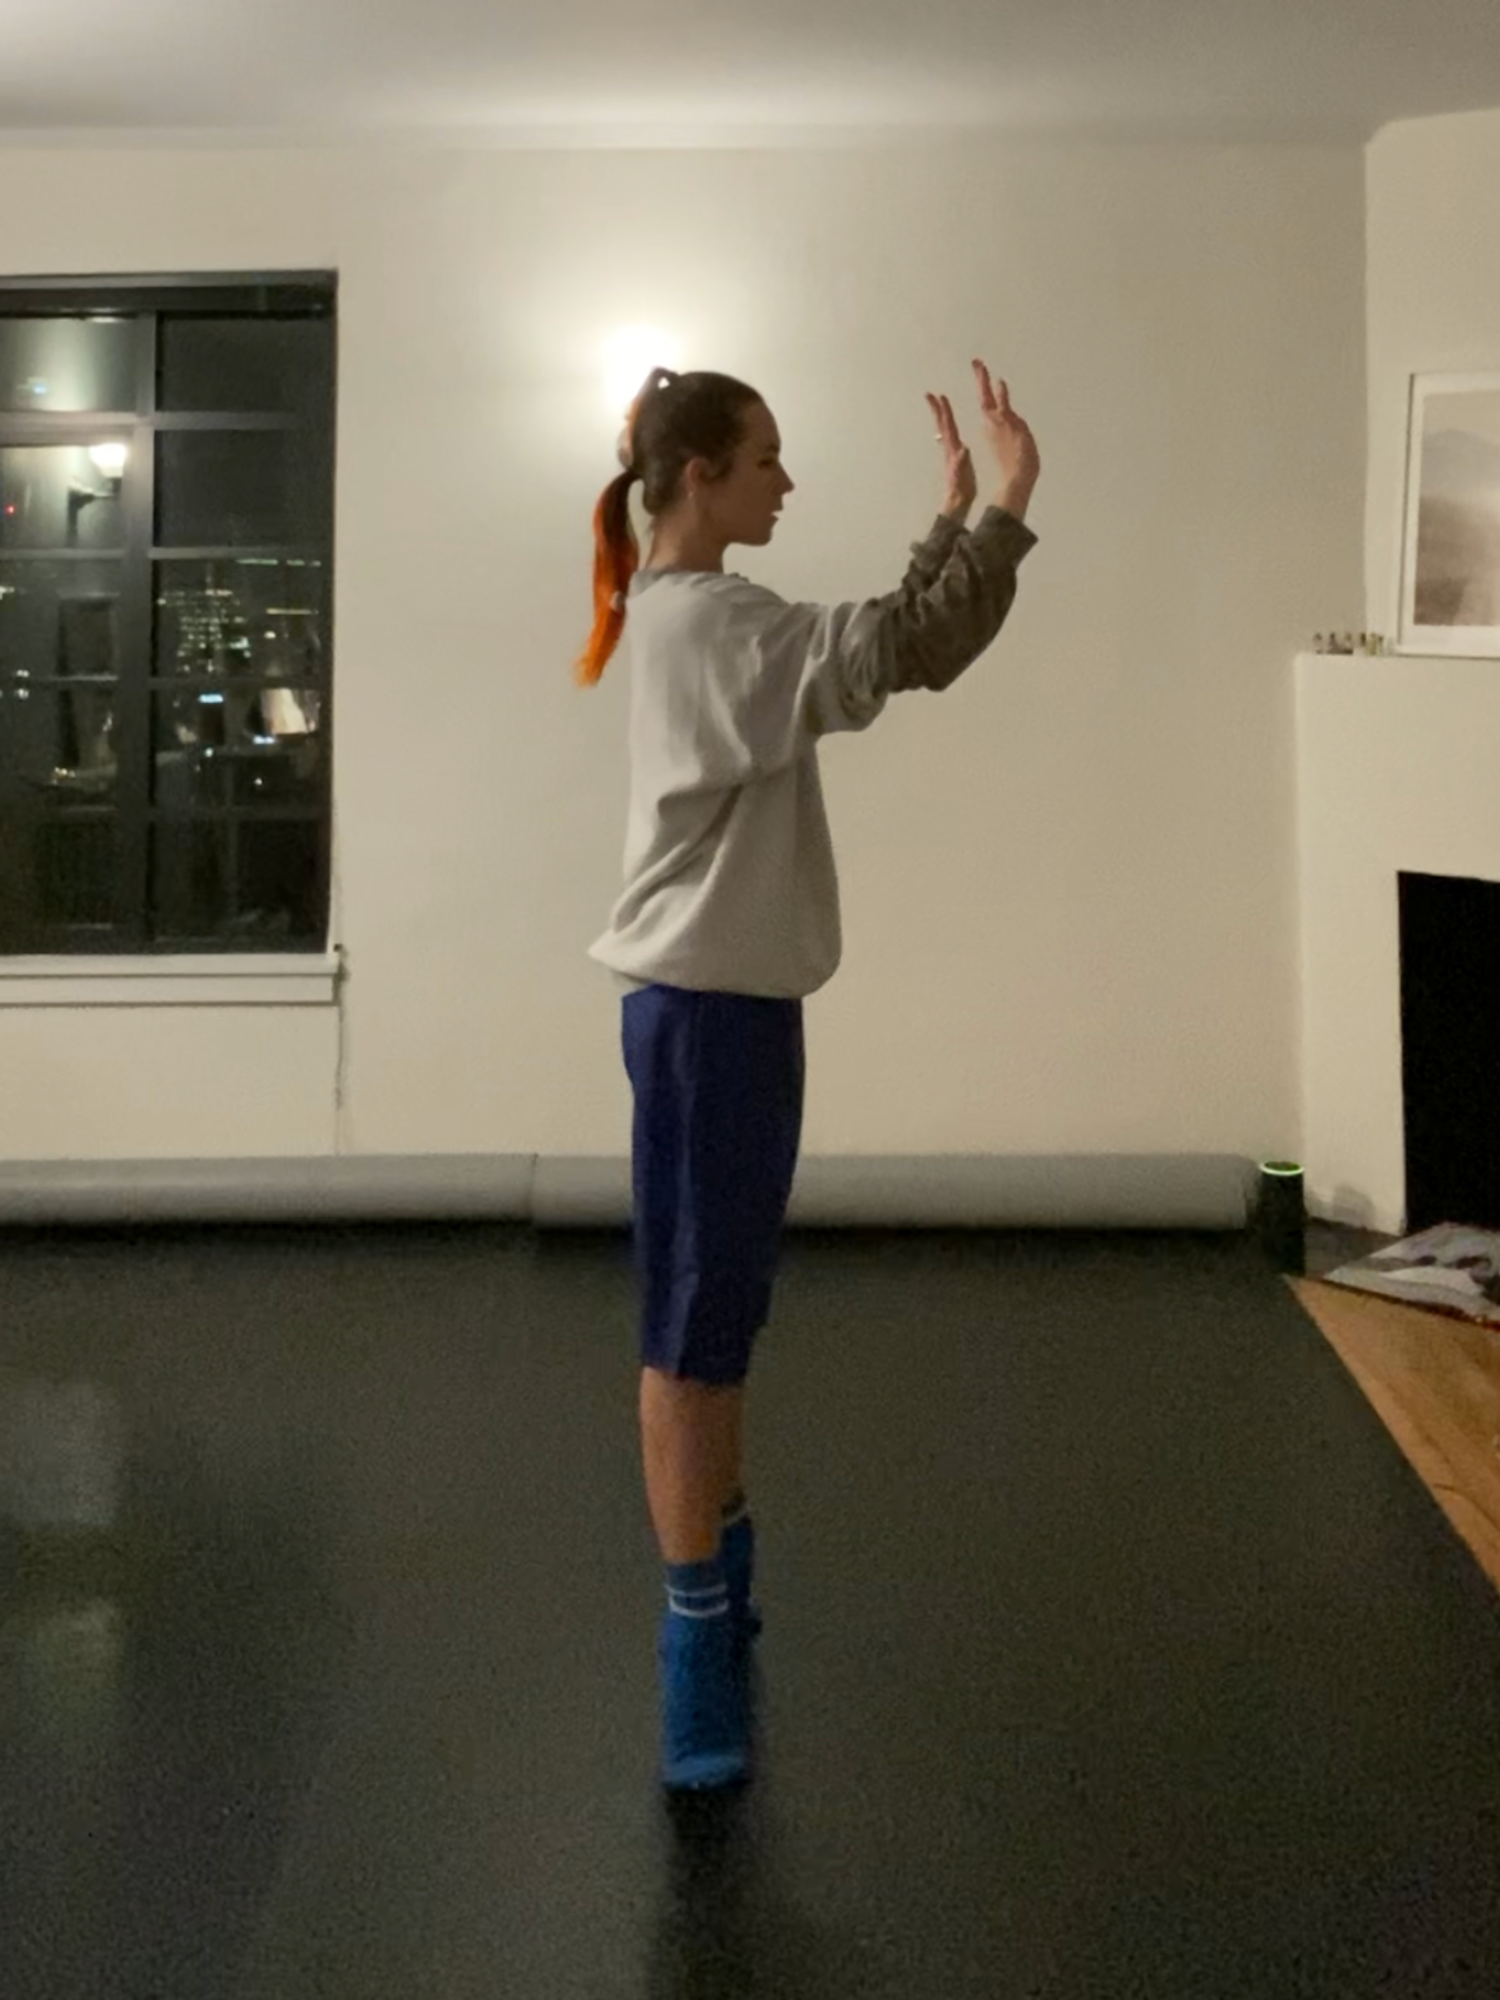 Wallich, a woman with her hair in a low ponytail, stands in her apartment. Two gray marley rolls are laid out beneath her, and there is a white wall behind her. She wears blue socks, dark blue shorts and a grey sweatshirt. She balances in relevu00e9 with her arms placed in front of her, palms facing outward.